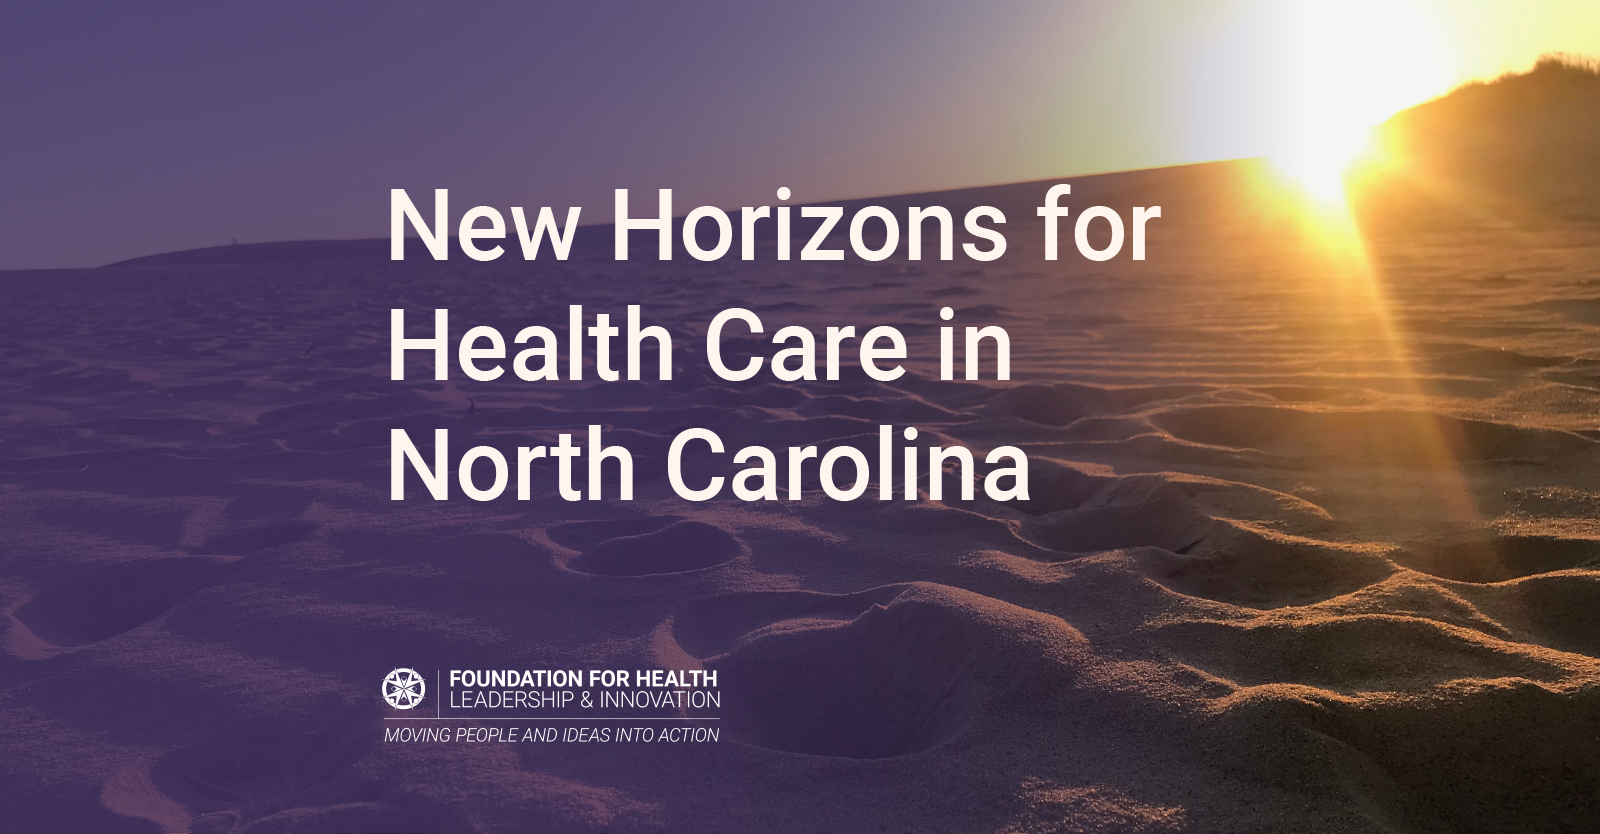 New Horizons for Health Care in North Carolina Image